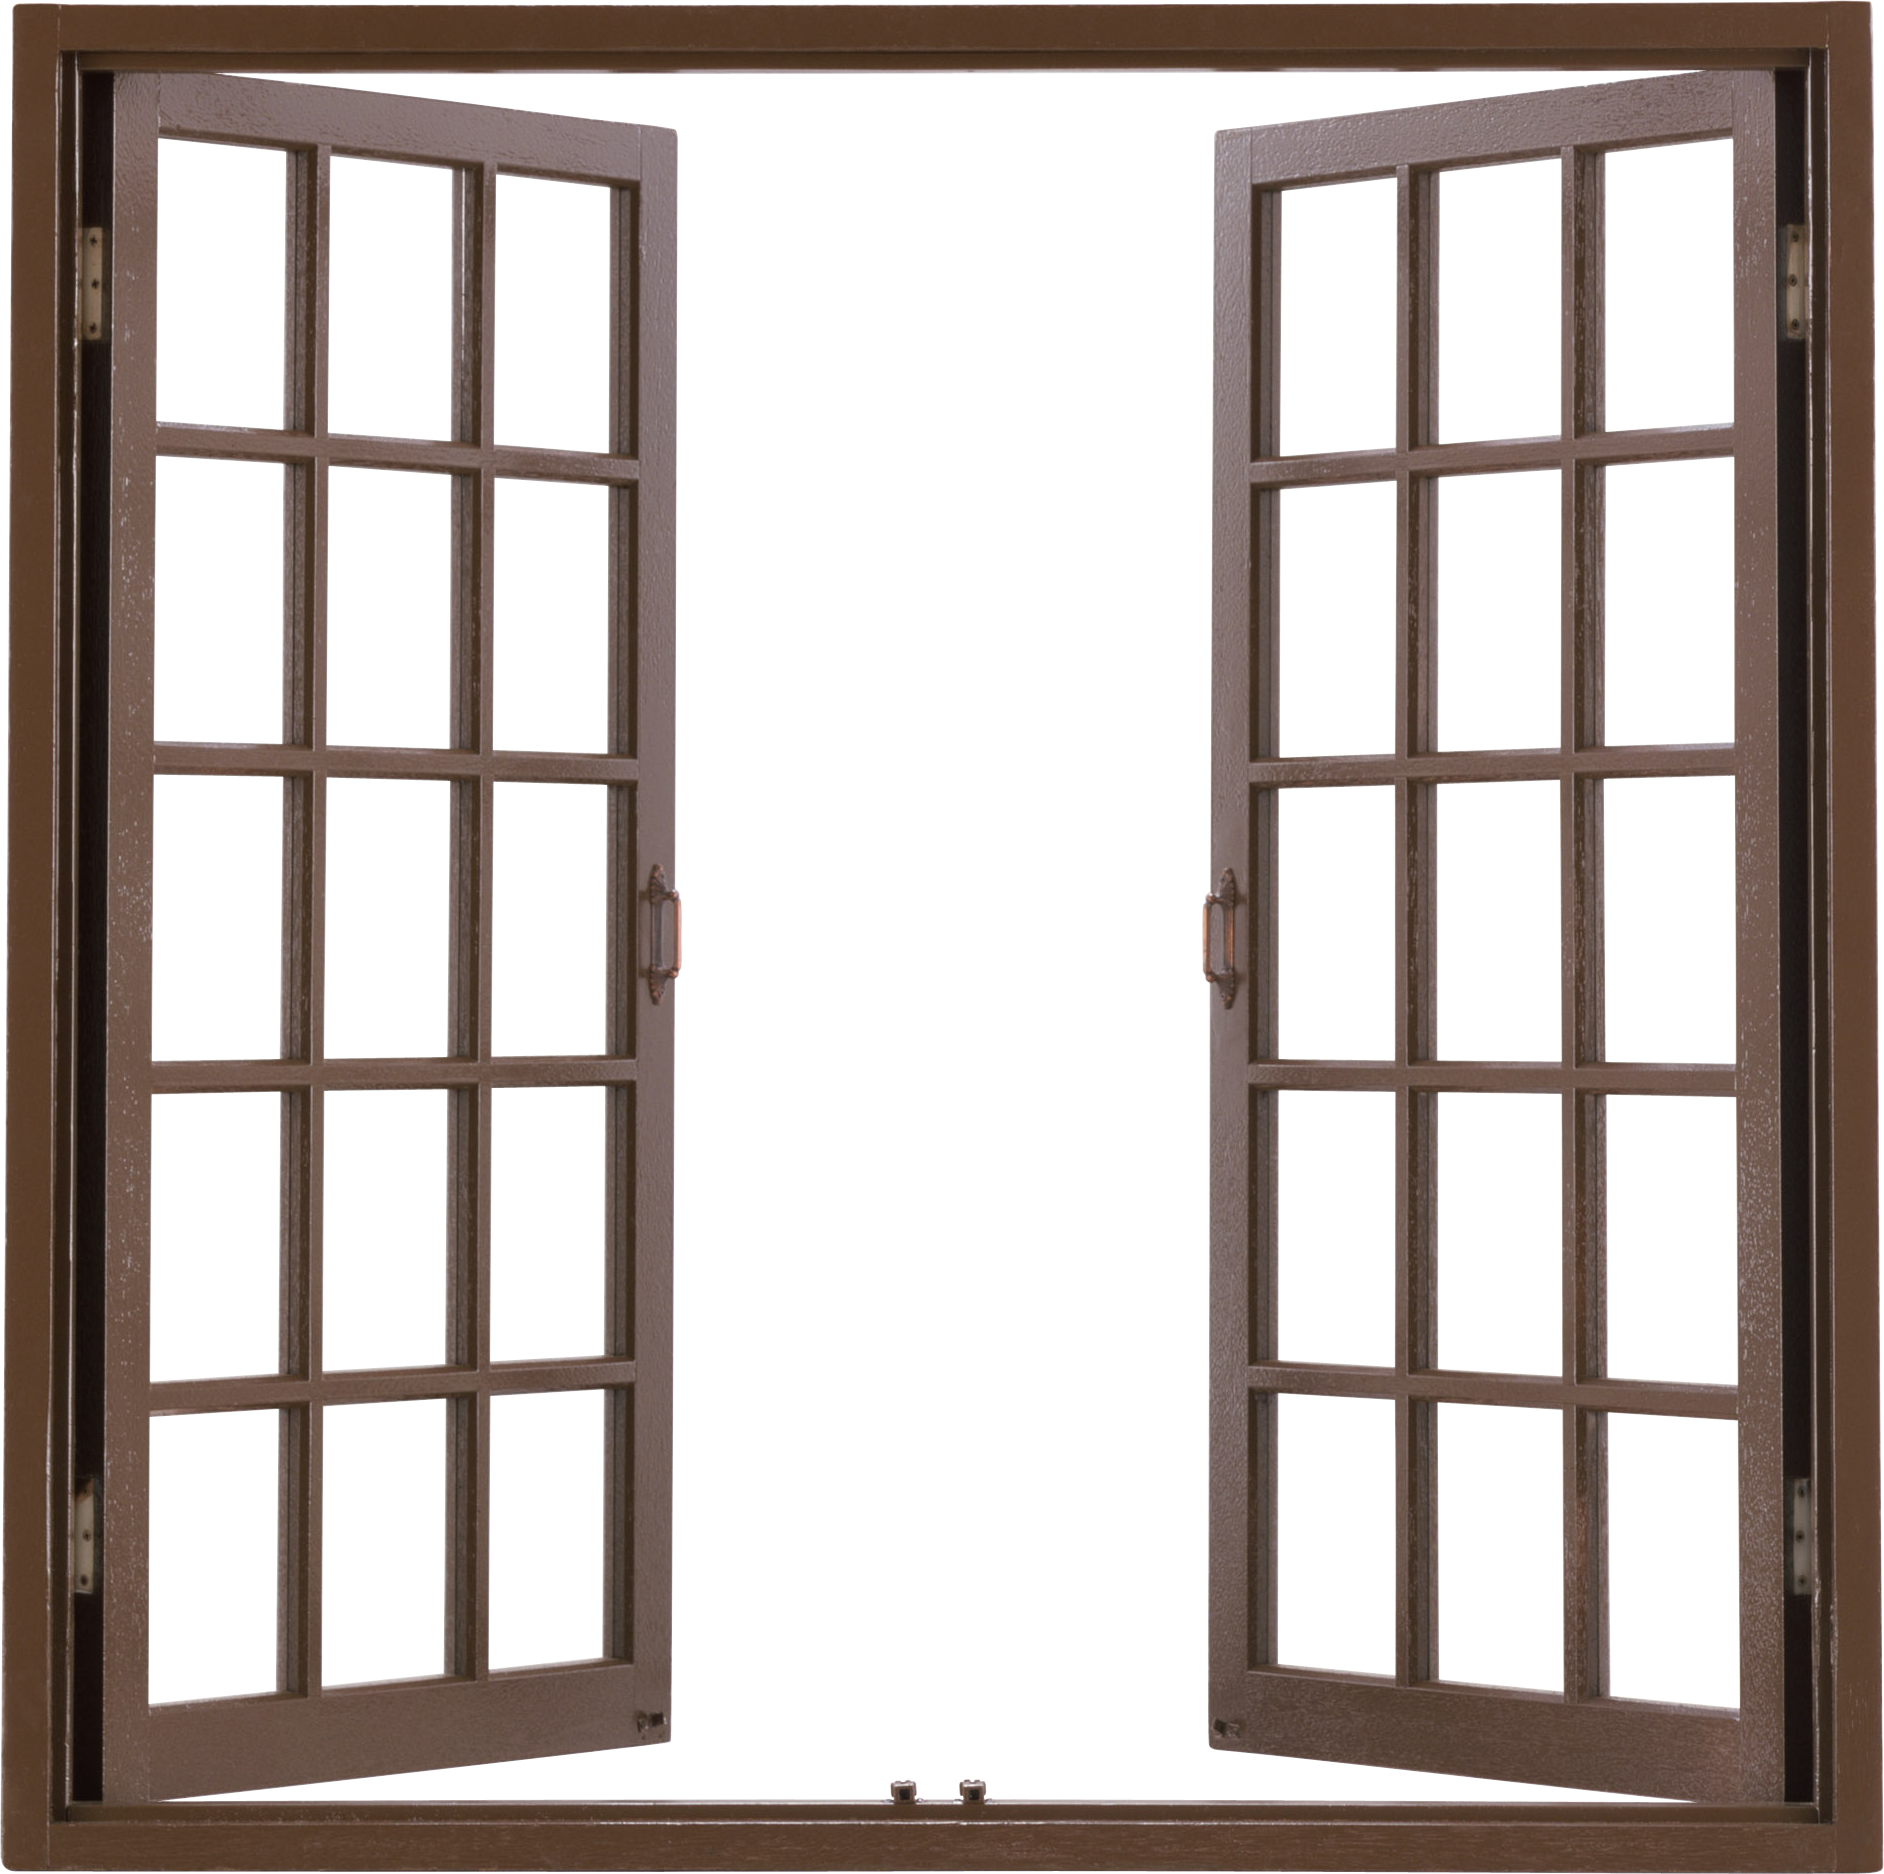 Window PNG images free download, open window.